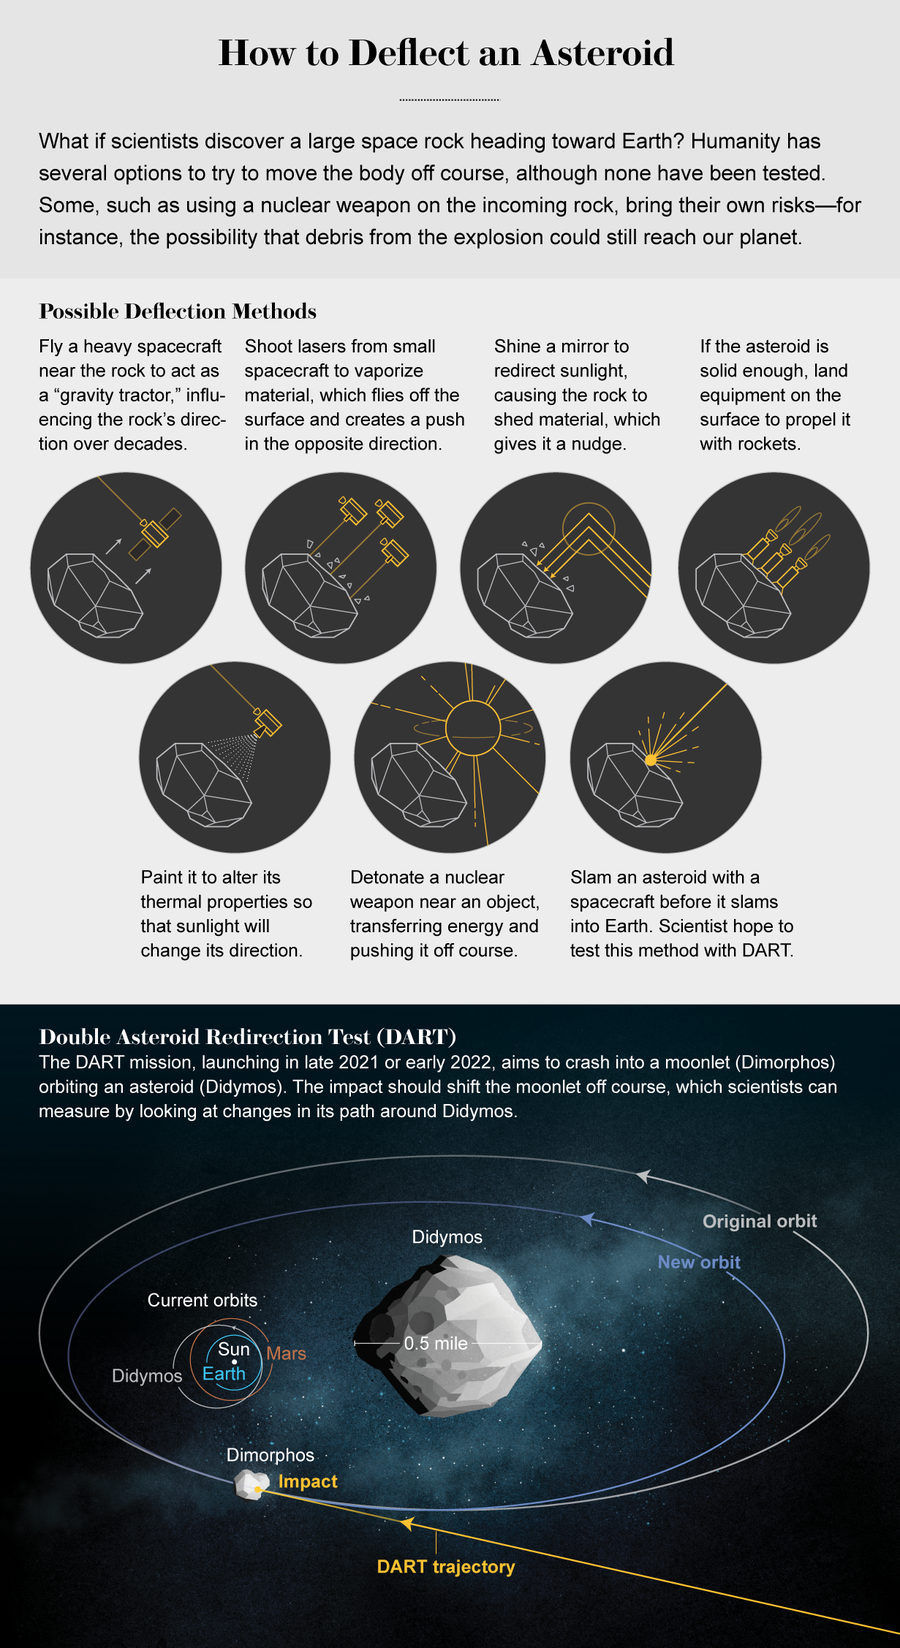 Graphic shows ways to deflect an asteroid and explains how the Double Asteroid Redirection Test (DART) mission will work.